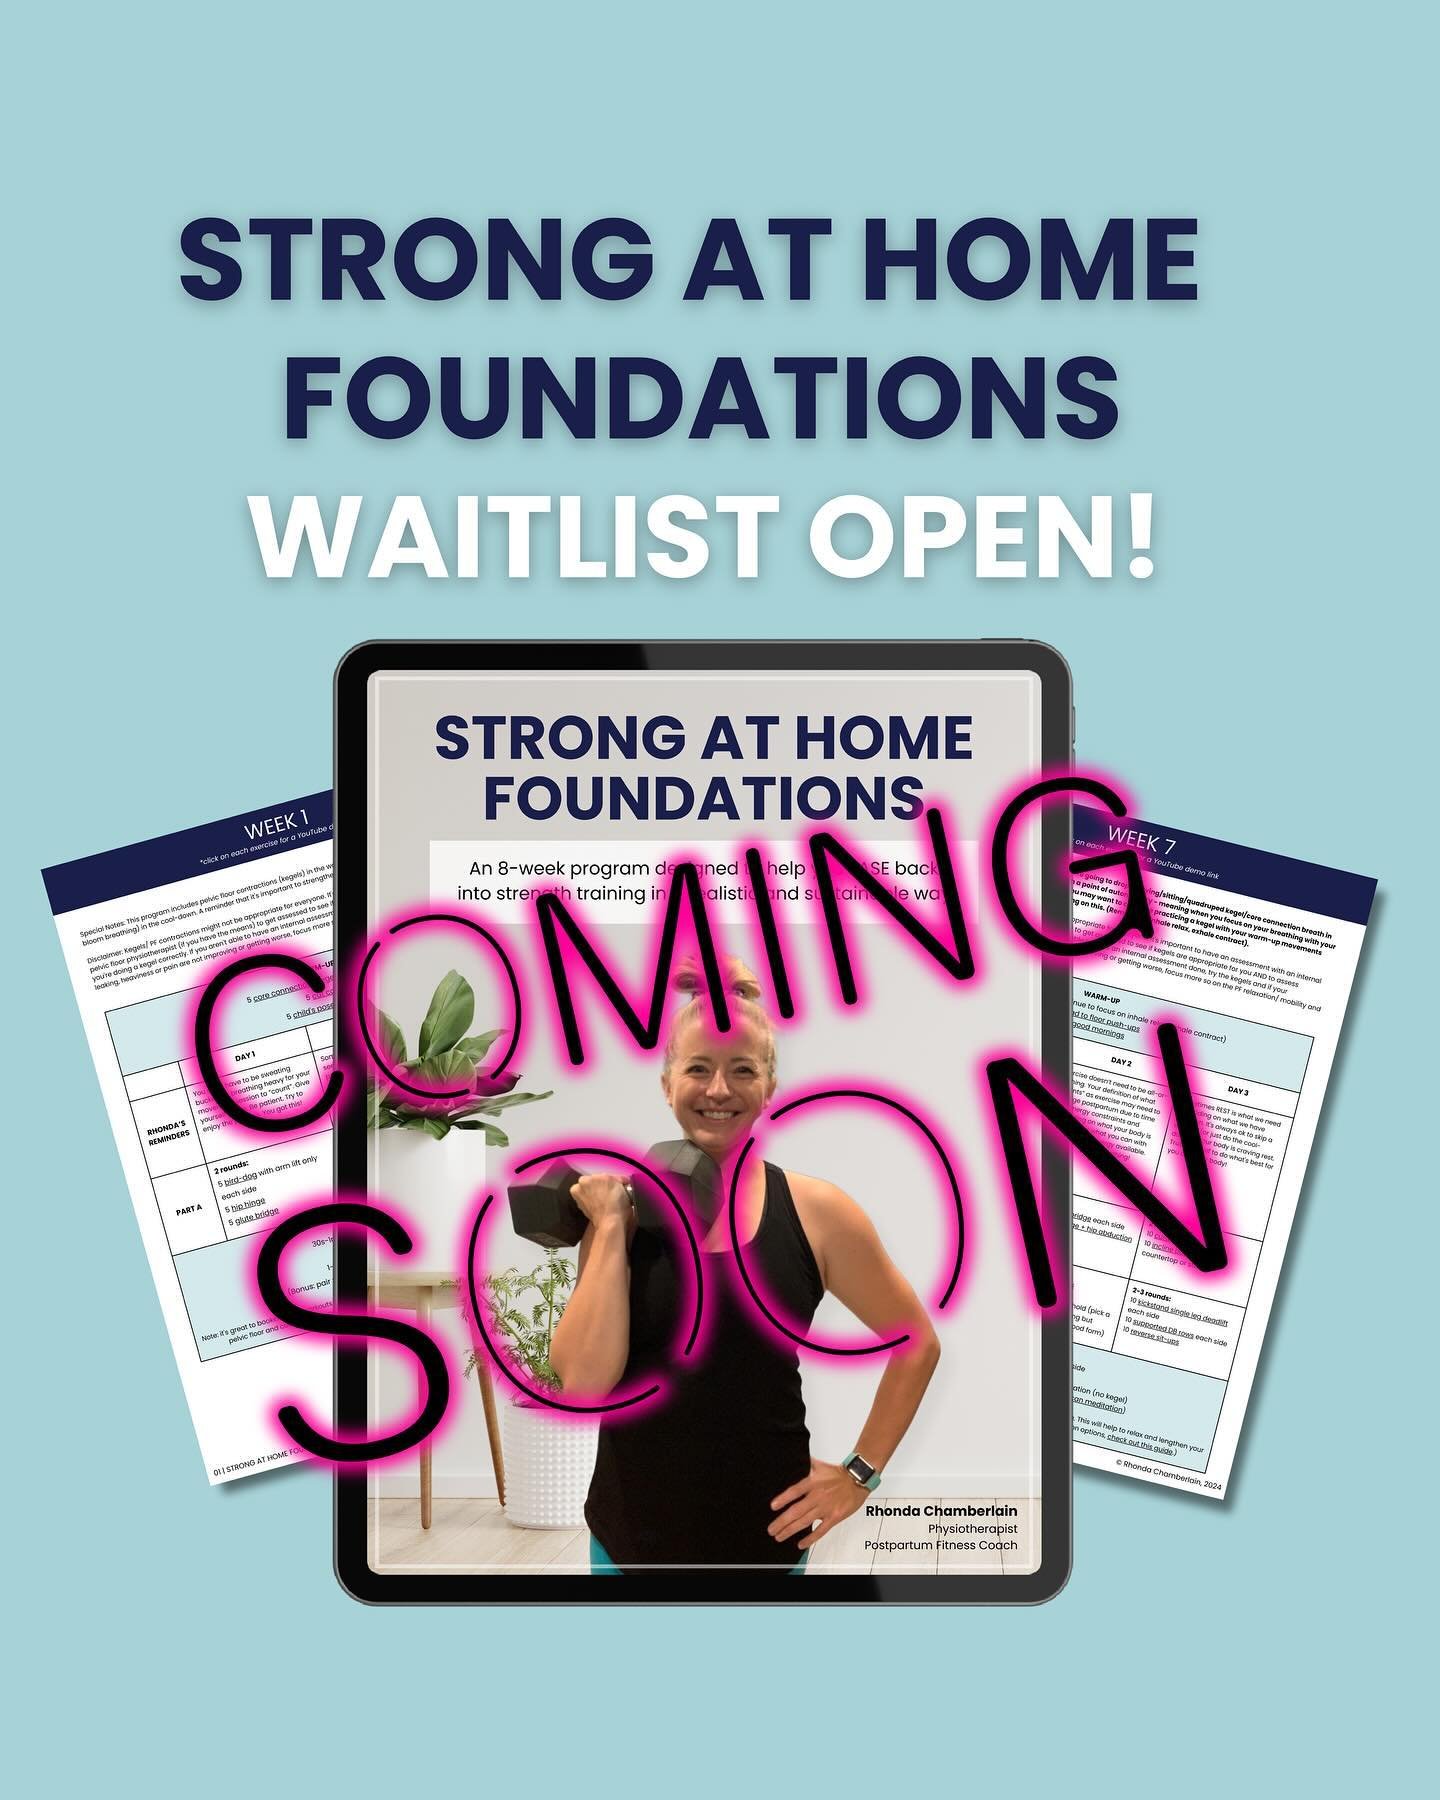 [BRAND NEW PROGRAM COMING SOON 👀]

🗓️ I have a new program coming May 17!&nbsp;Mark your calendars! 

🤩 Strong at Home Foundations is a LOW-COST DIY 8-week program designed to help you EASE back into strength training in a realistic and sustainabl